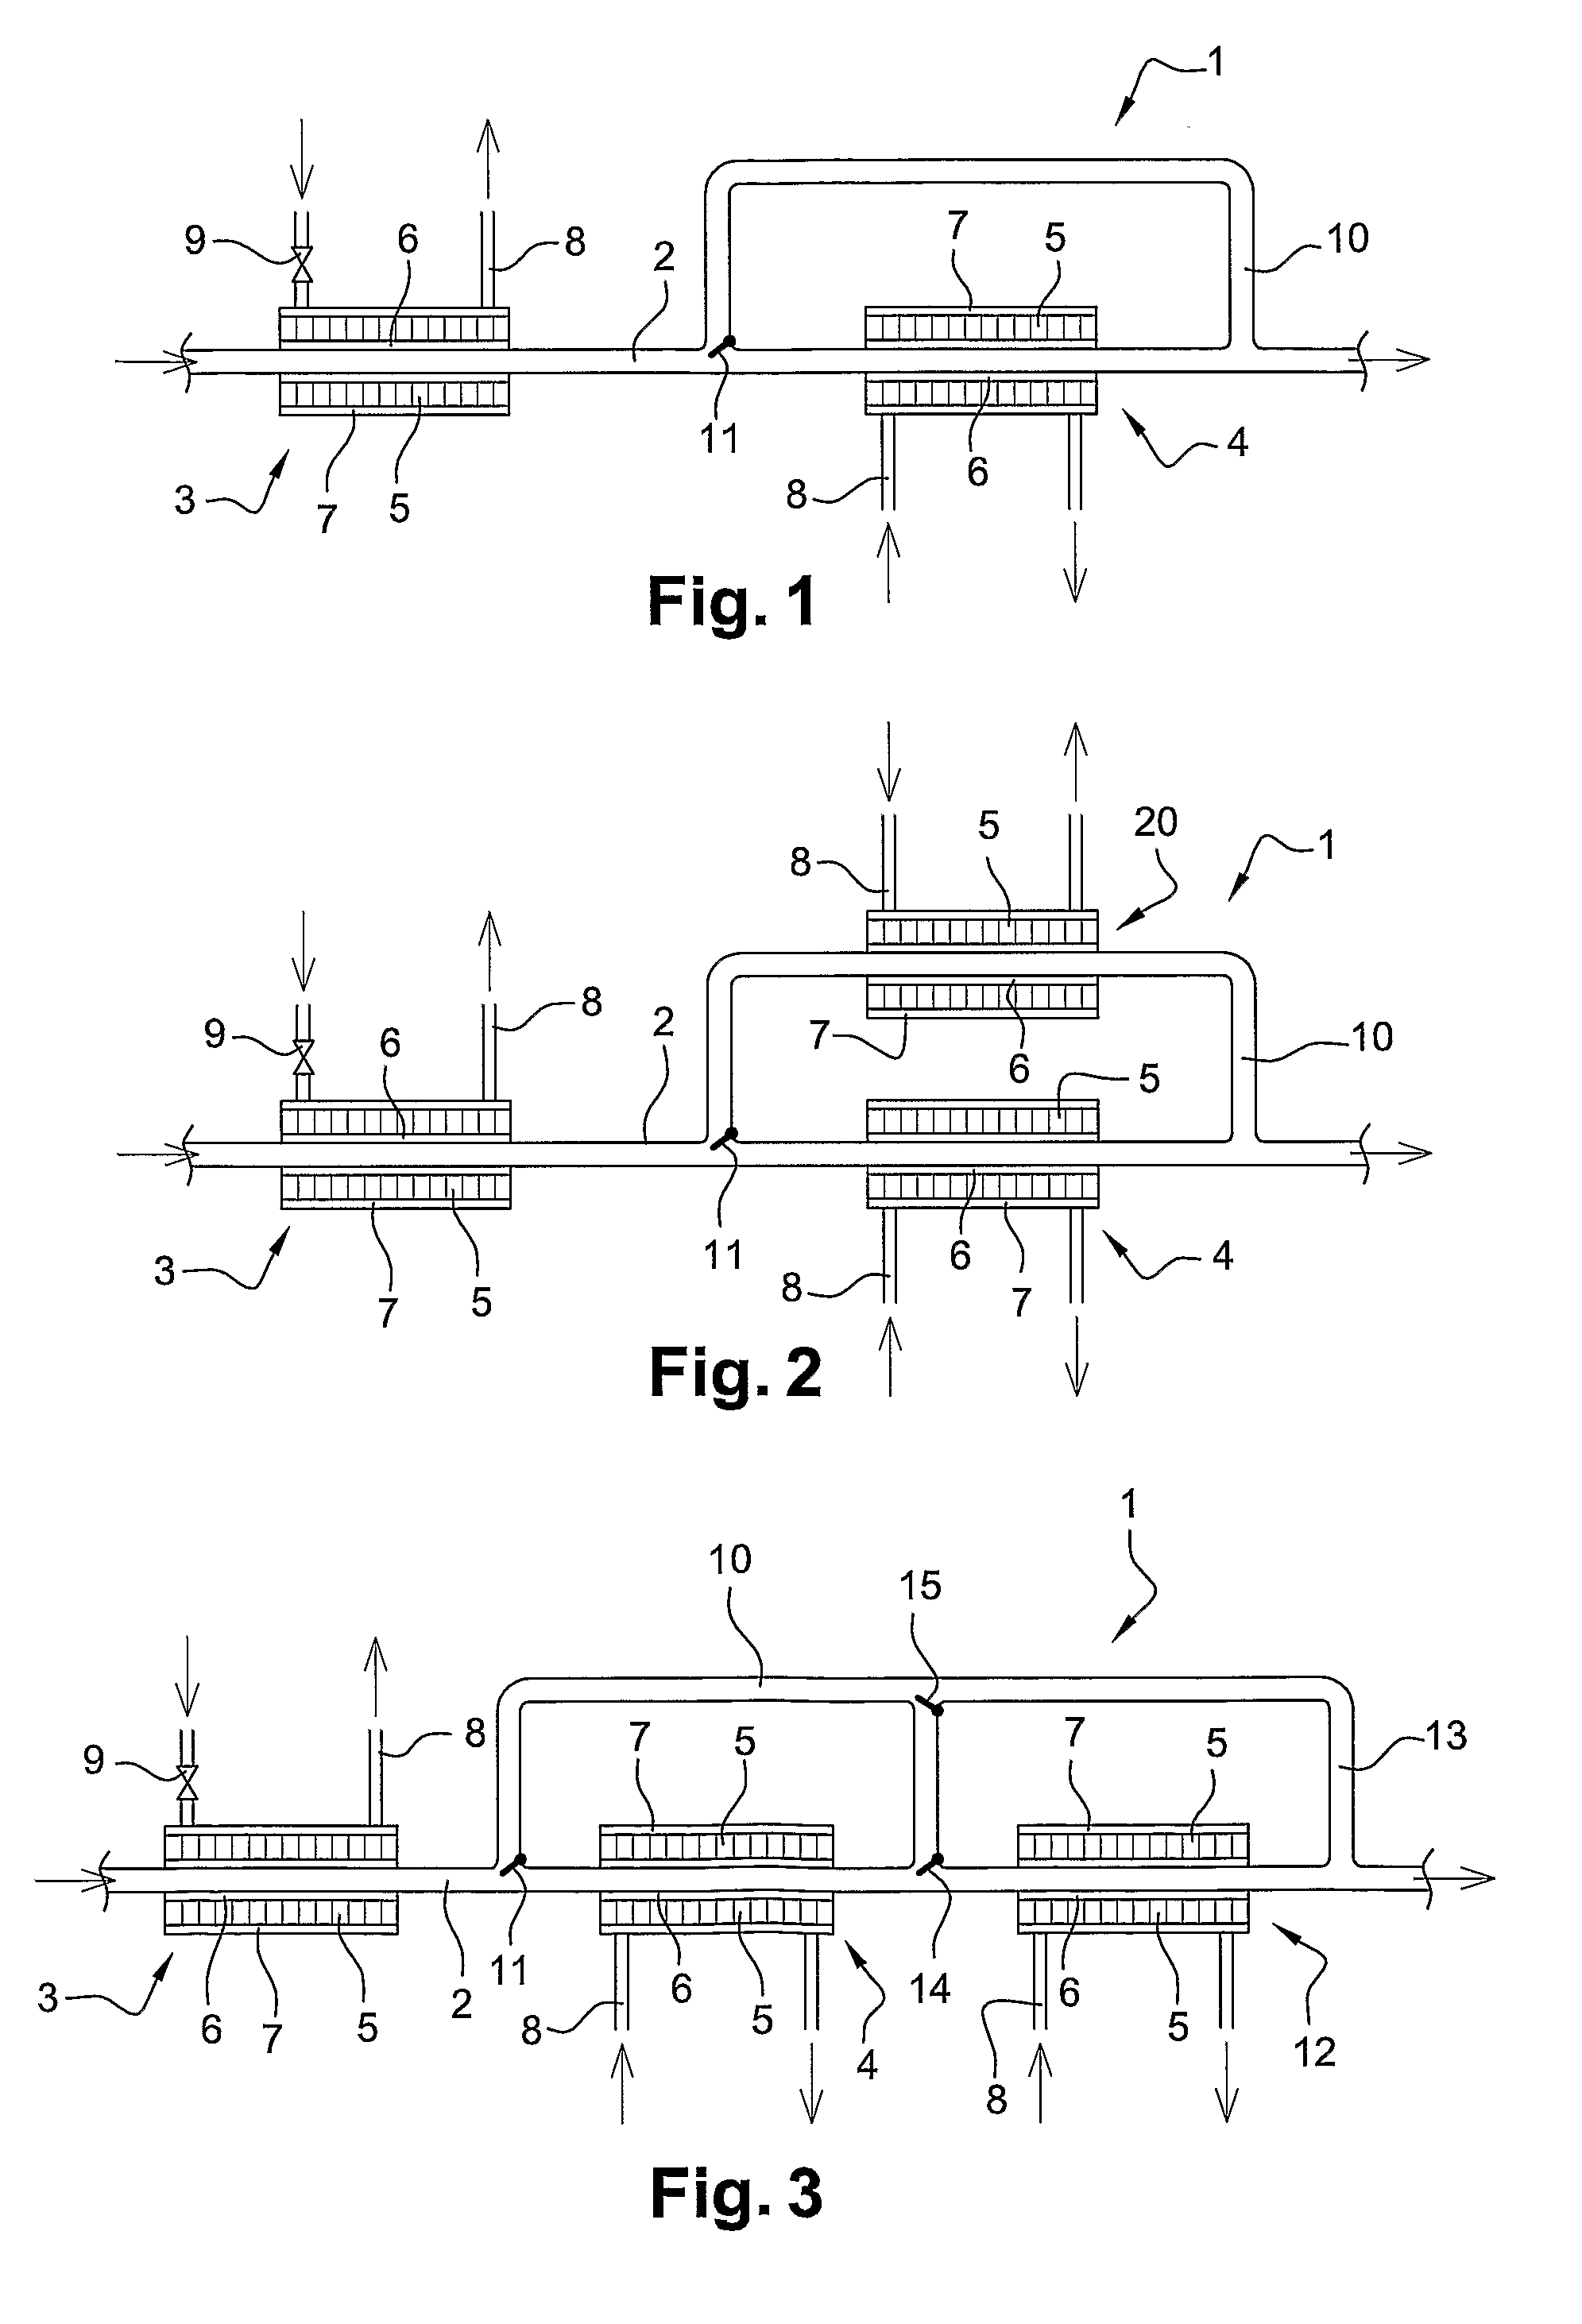 Energy recovery system for an internal combustion engine arrangement, comprising thermoelectric devices